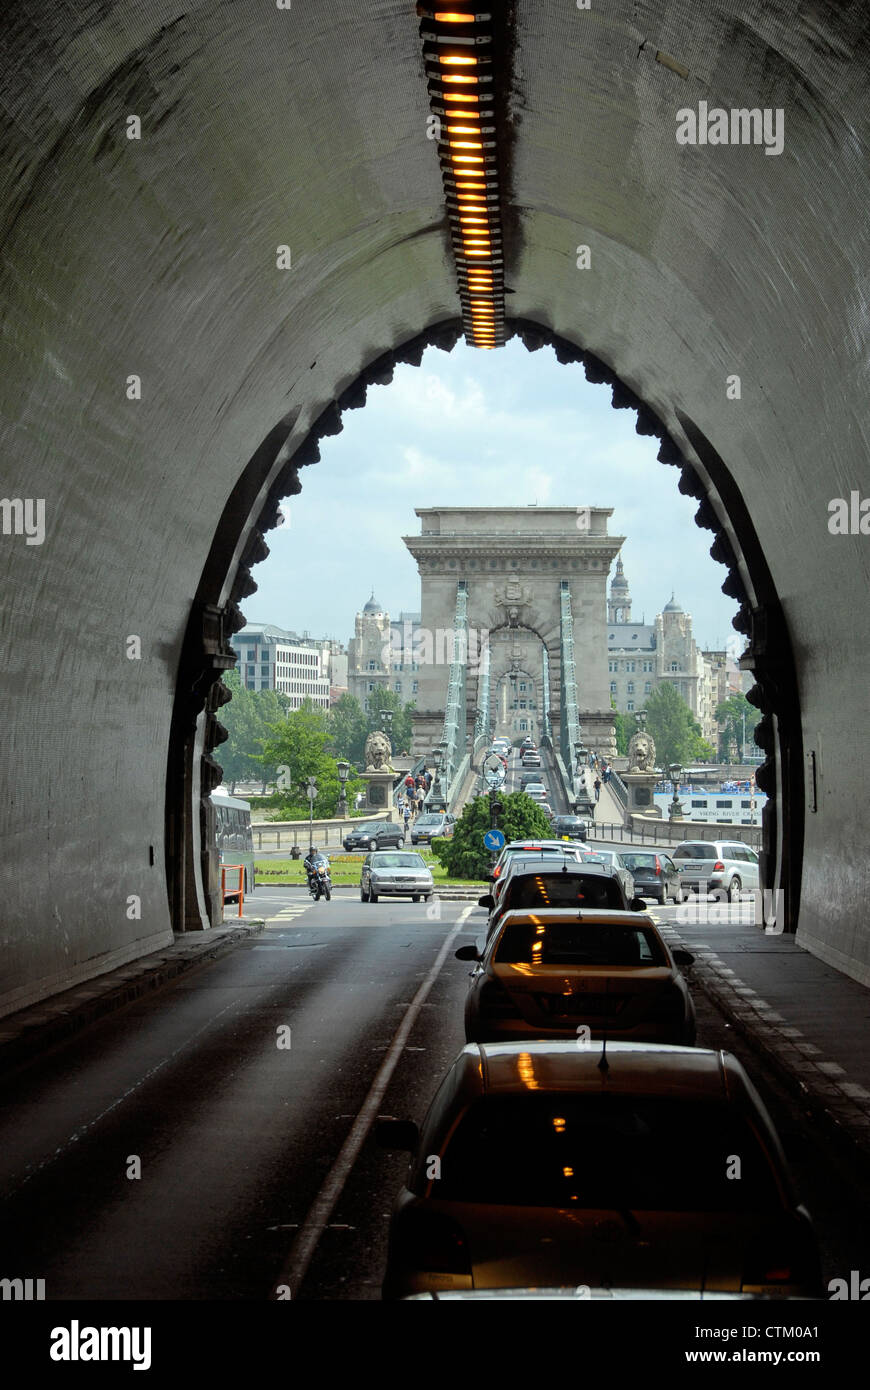 View of Liberty Bridge from tunnel in Budapest, Hungary Stock Photo